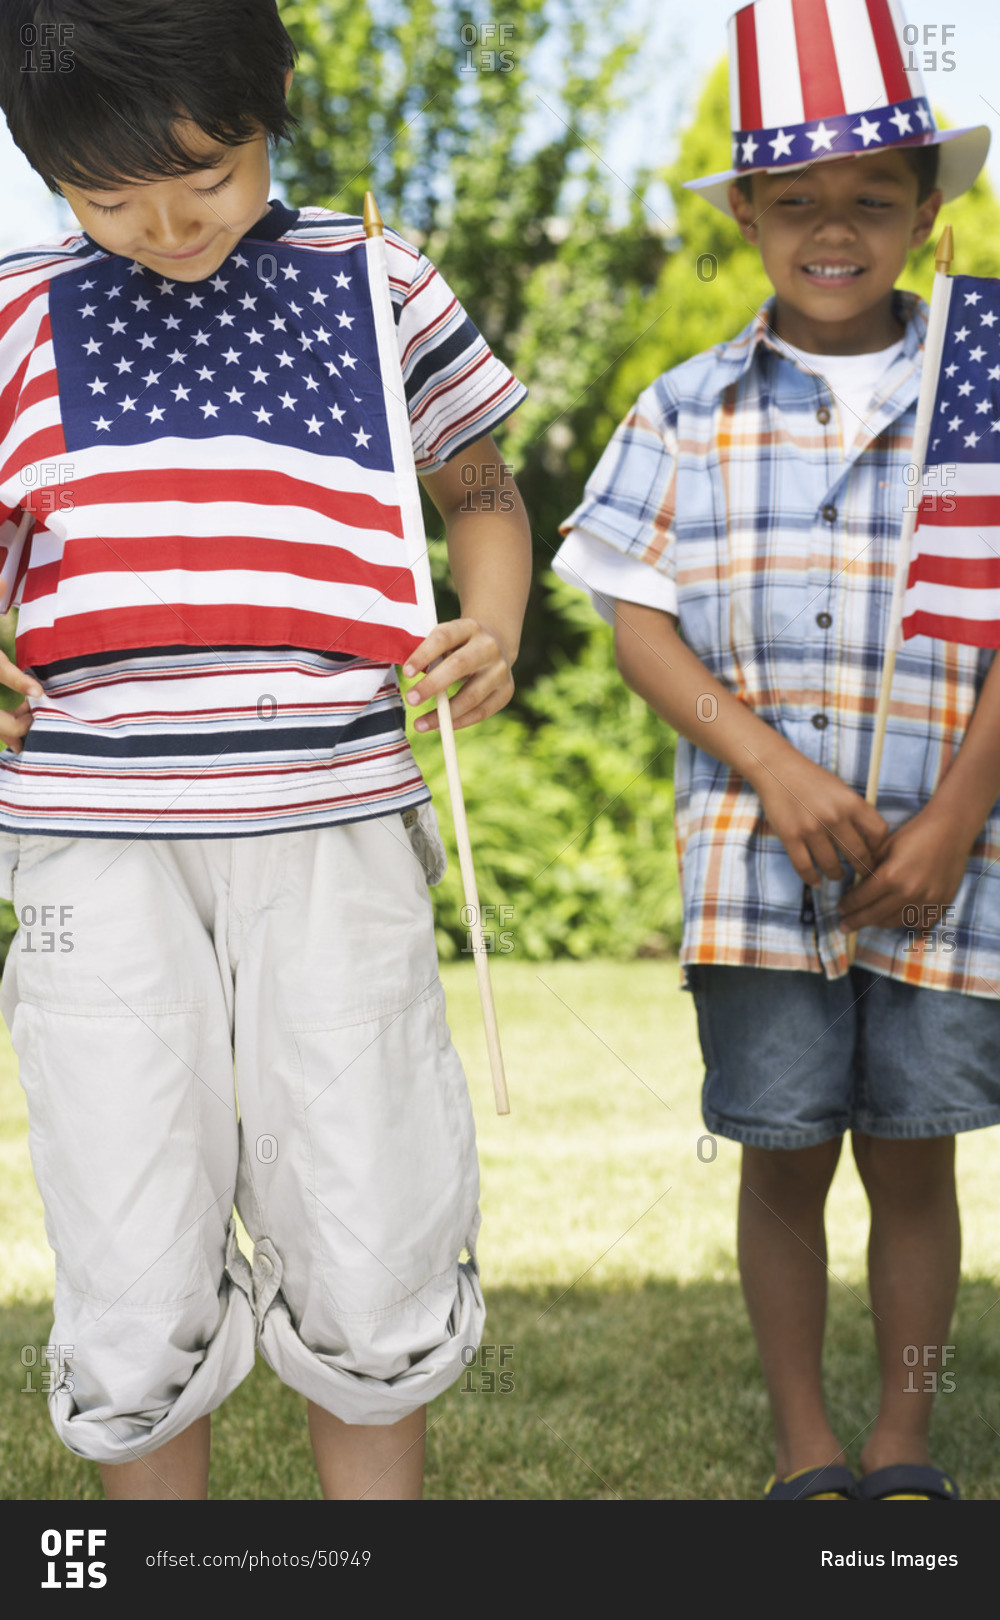 Boys holding American flags